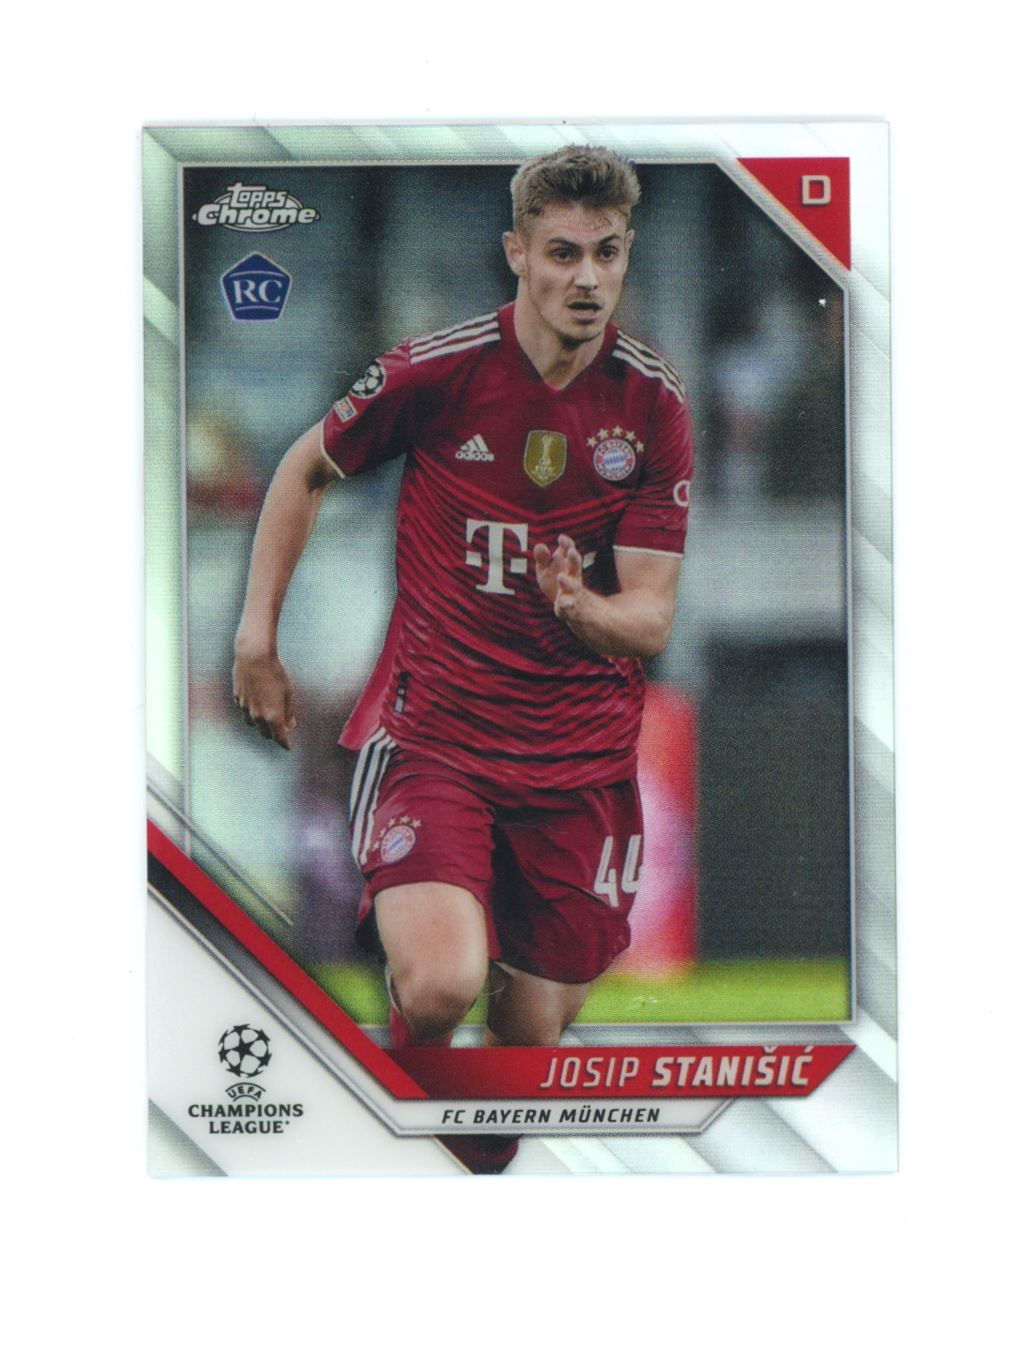 Josip Stanisic Silver Refractor 2021 Topps Chrome Champions League Rookie Card # 64